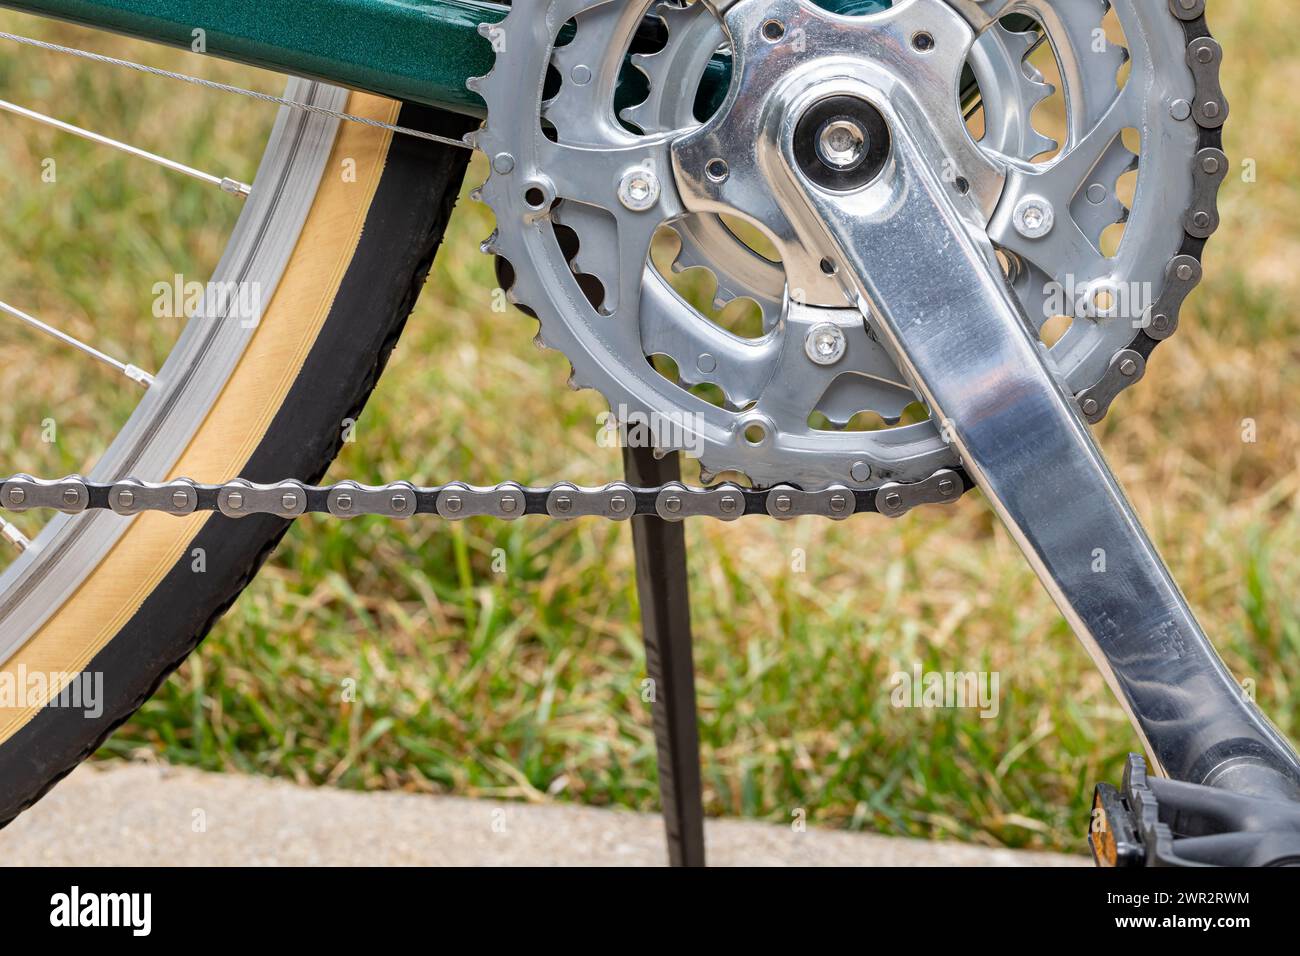 Bicycle chainring or crankset. Bike repair, maintenance, and bicycling safety concept. Stock Photo